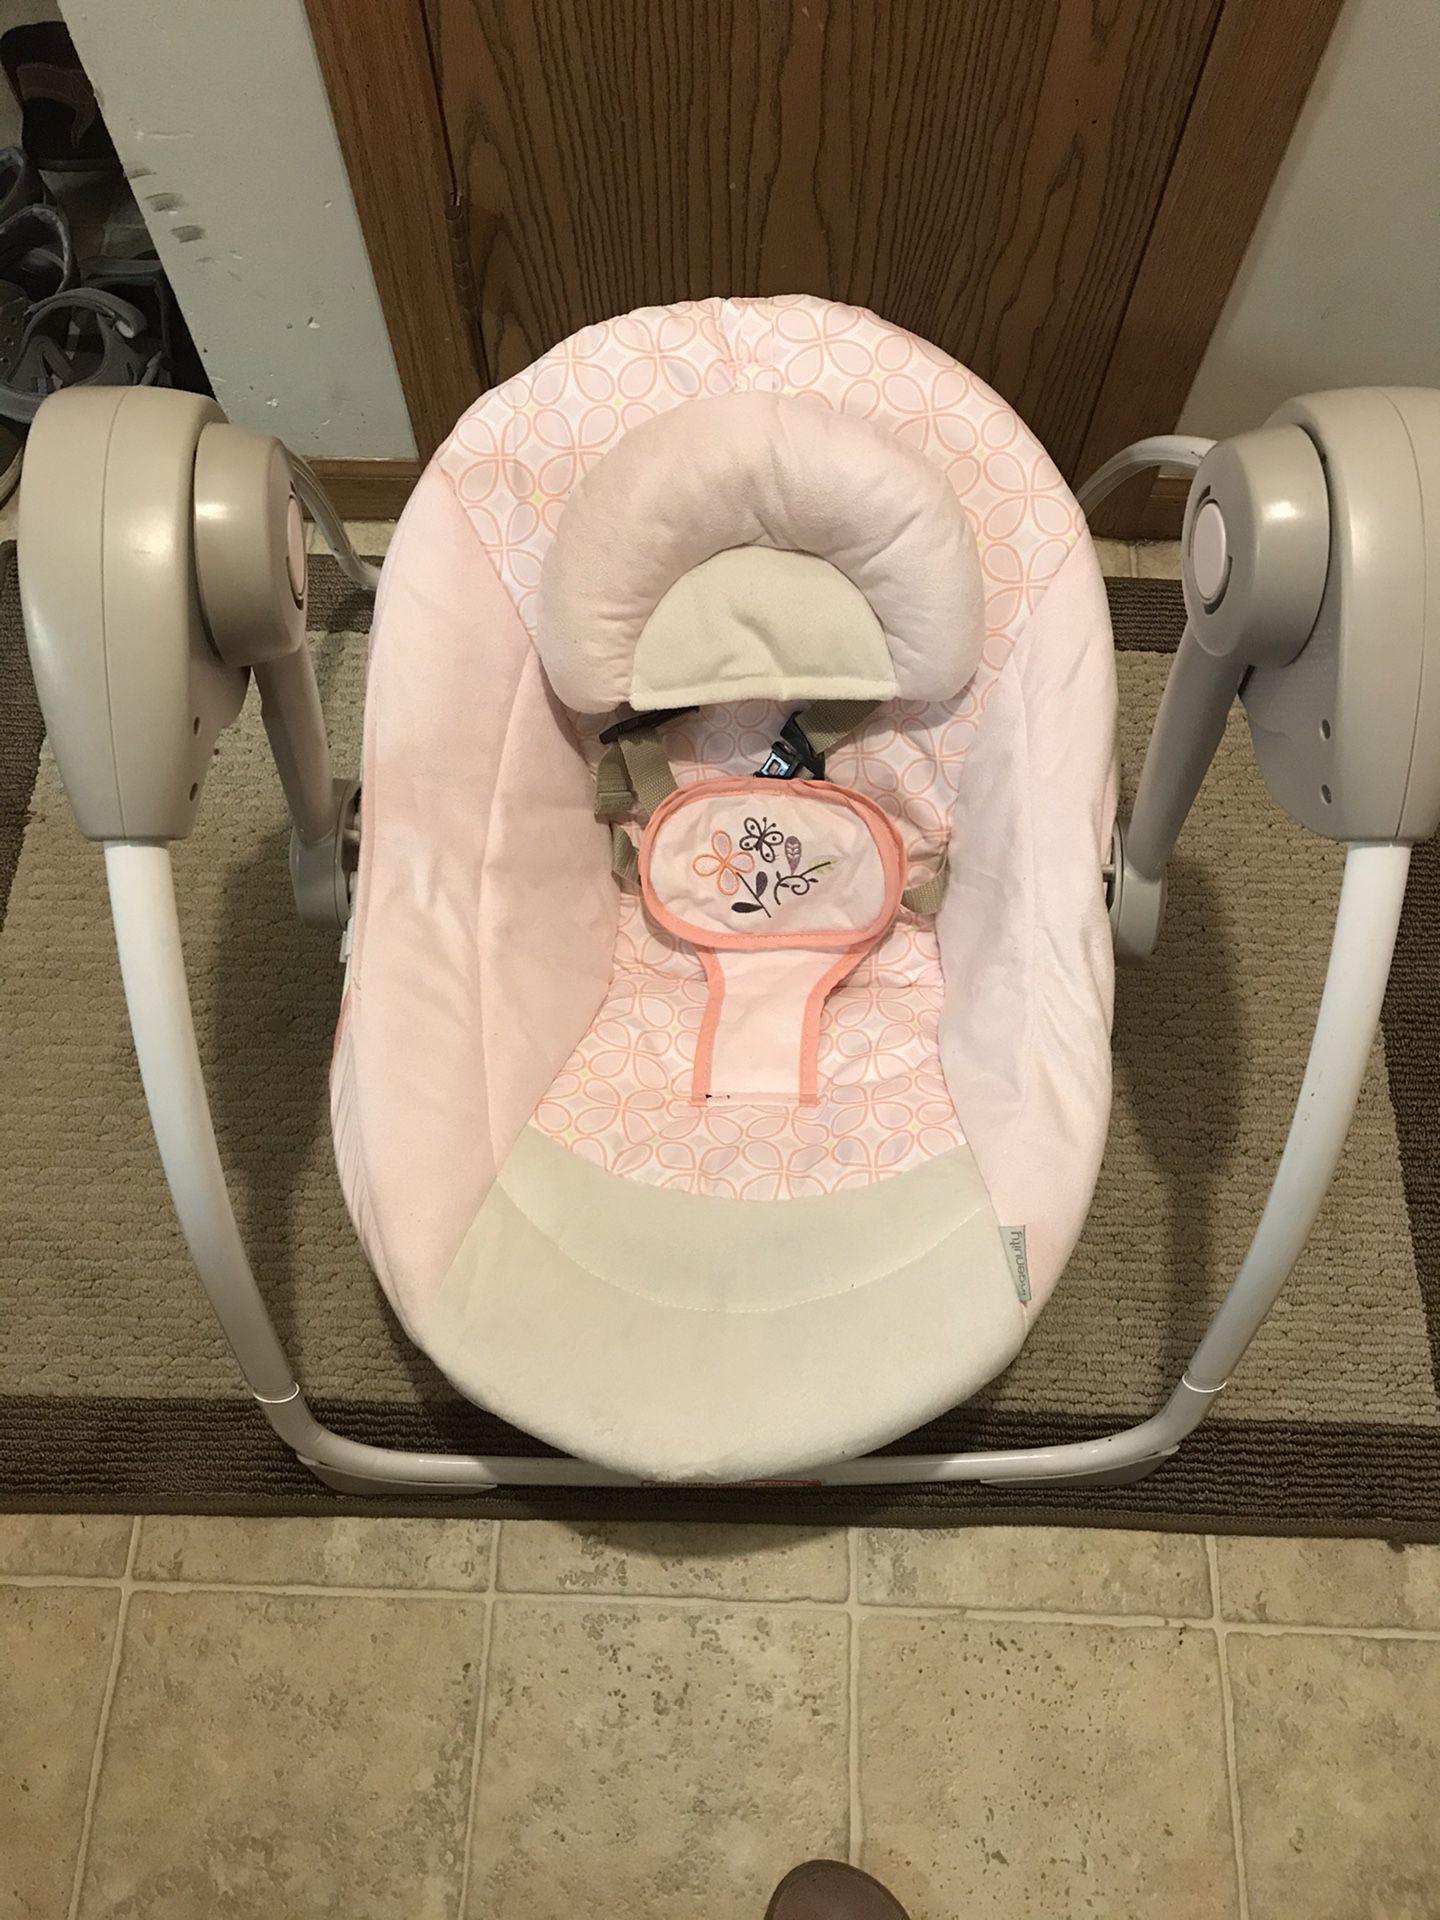 Ingenuity Comfort 2 Go Portable Swing, like New vibrate and sound great to put baby to sleep